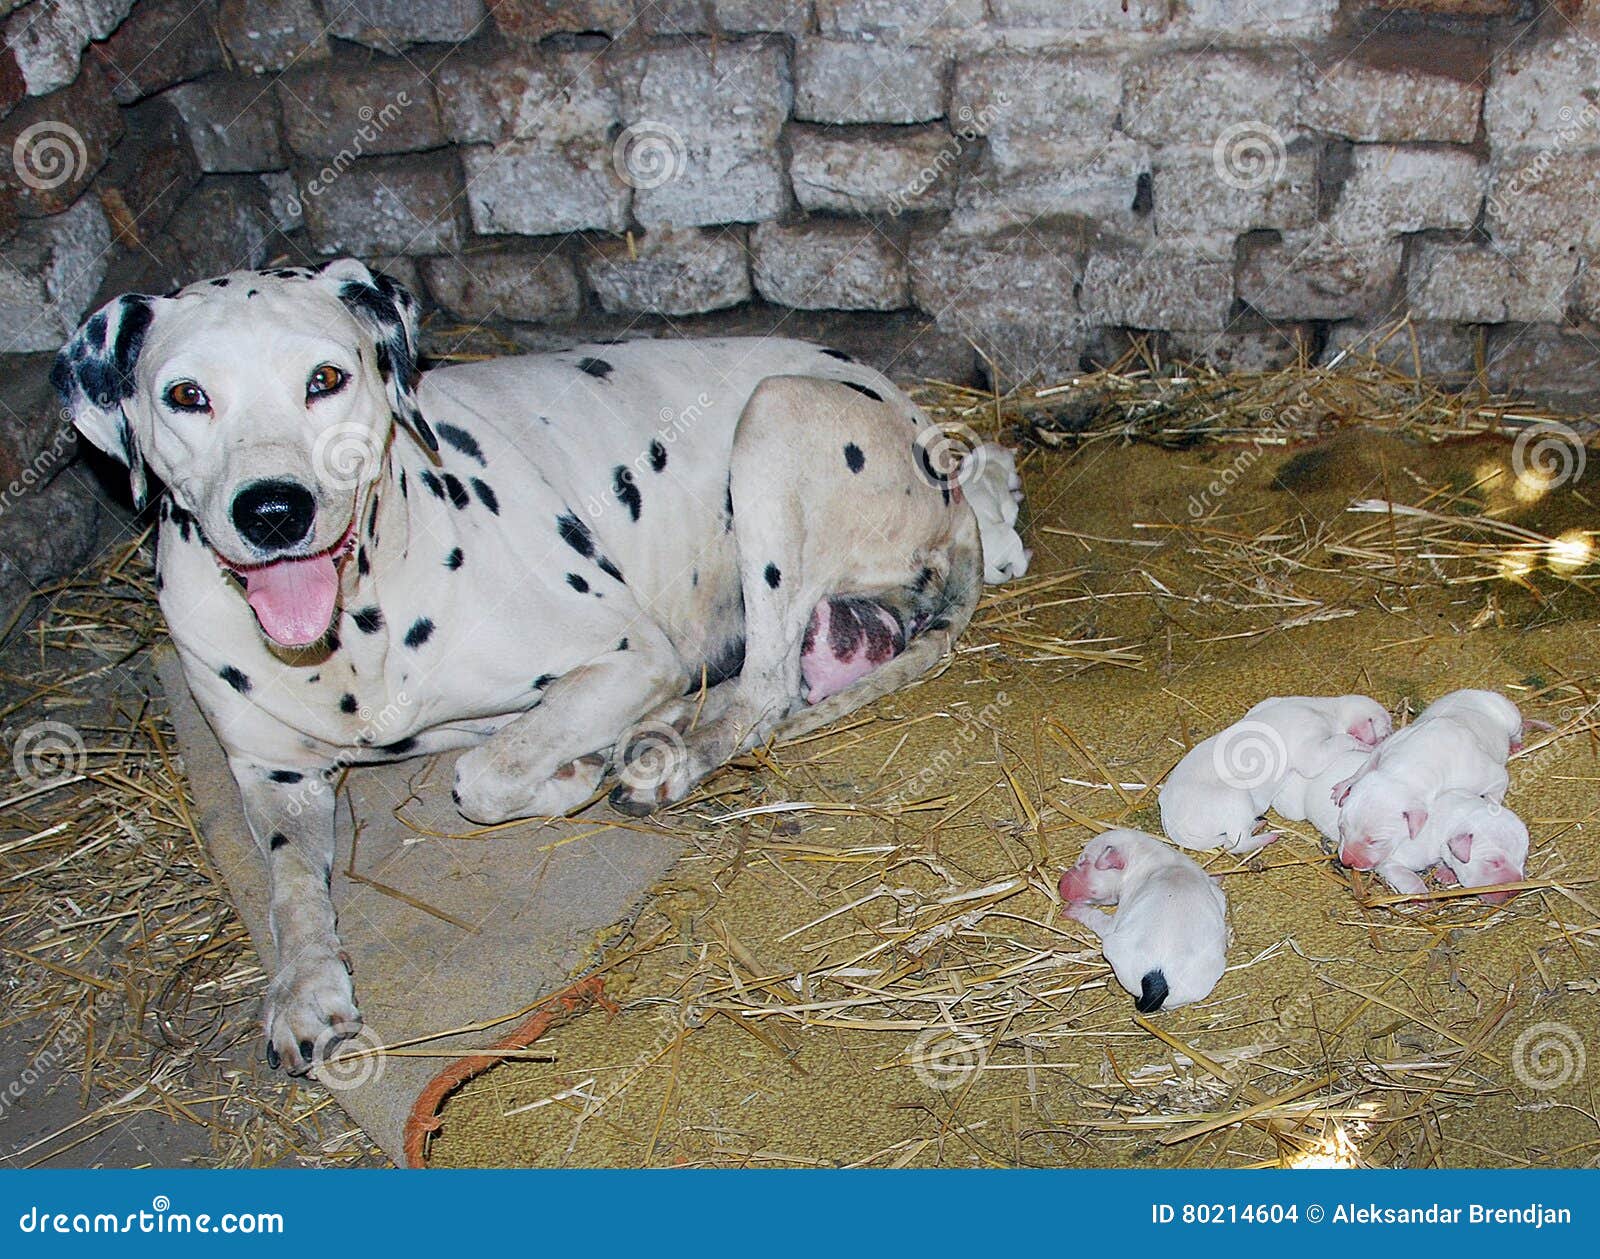 dalmatian dog, with babes newborn only one day